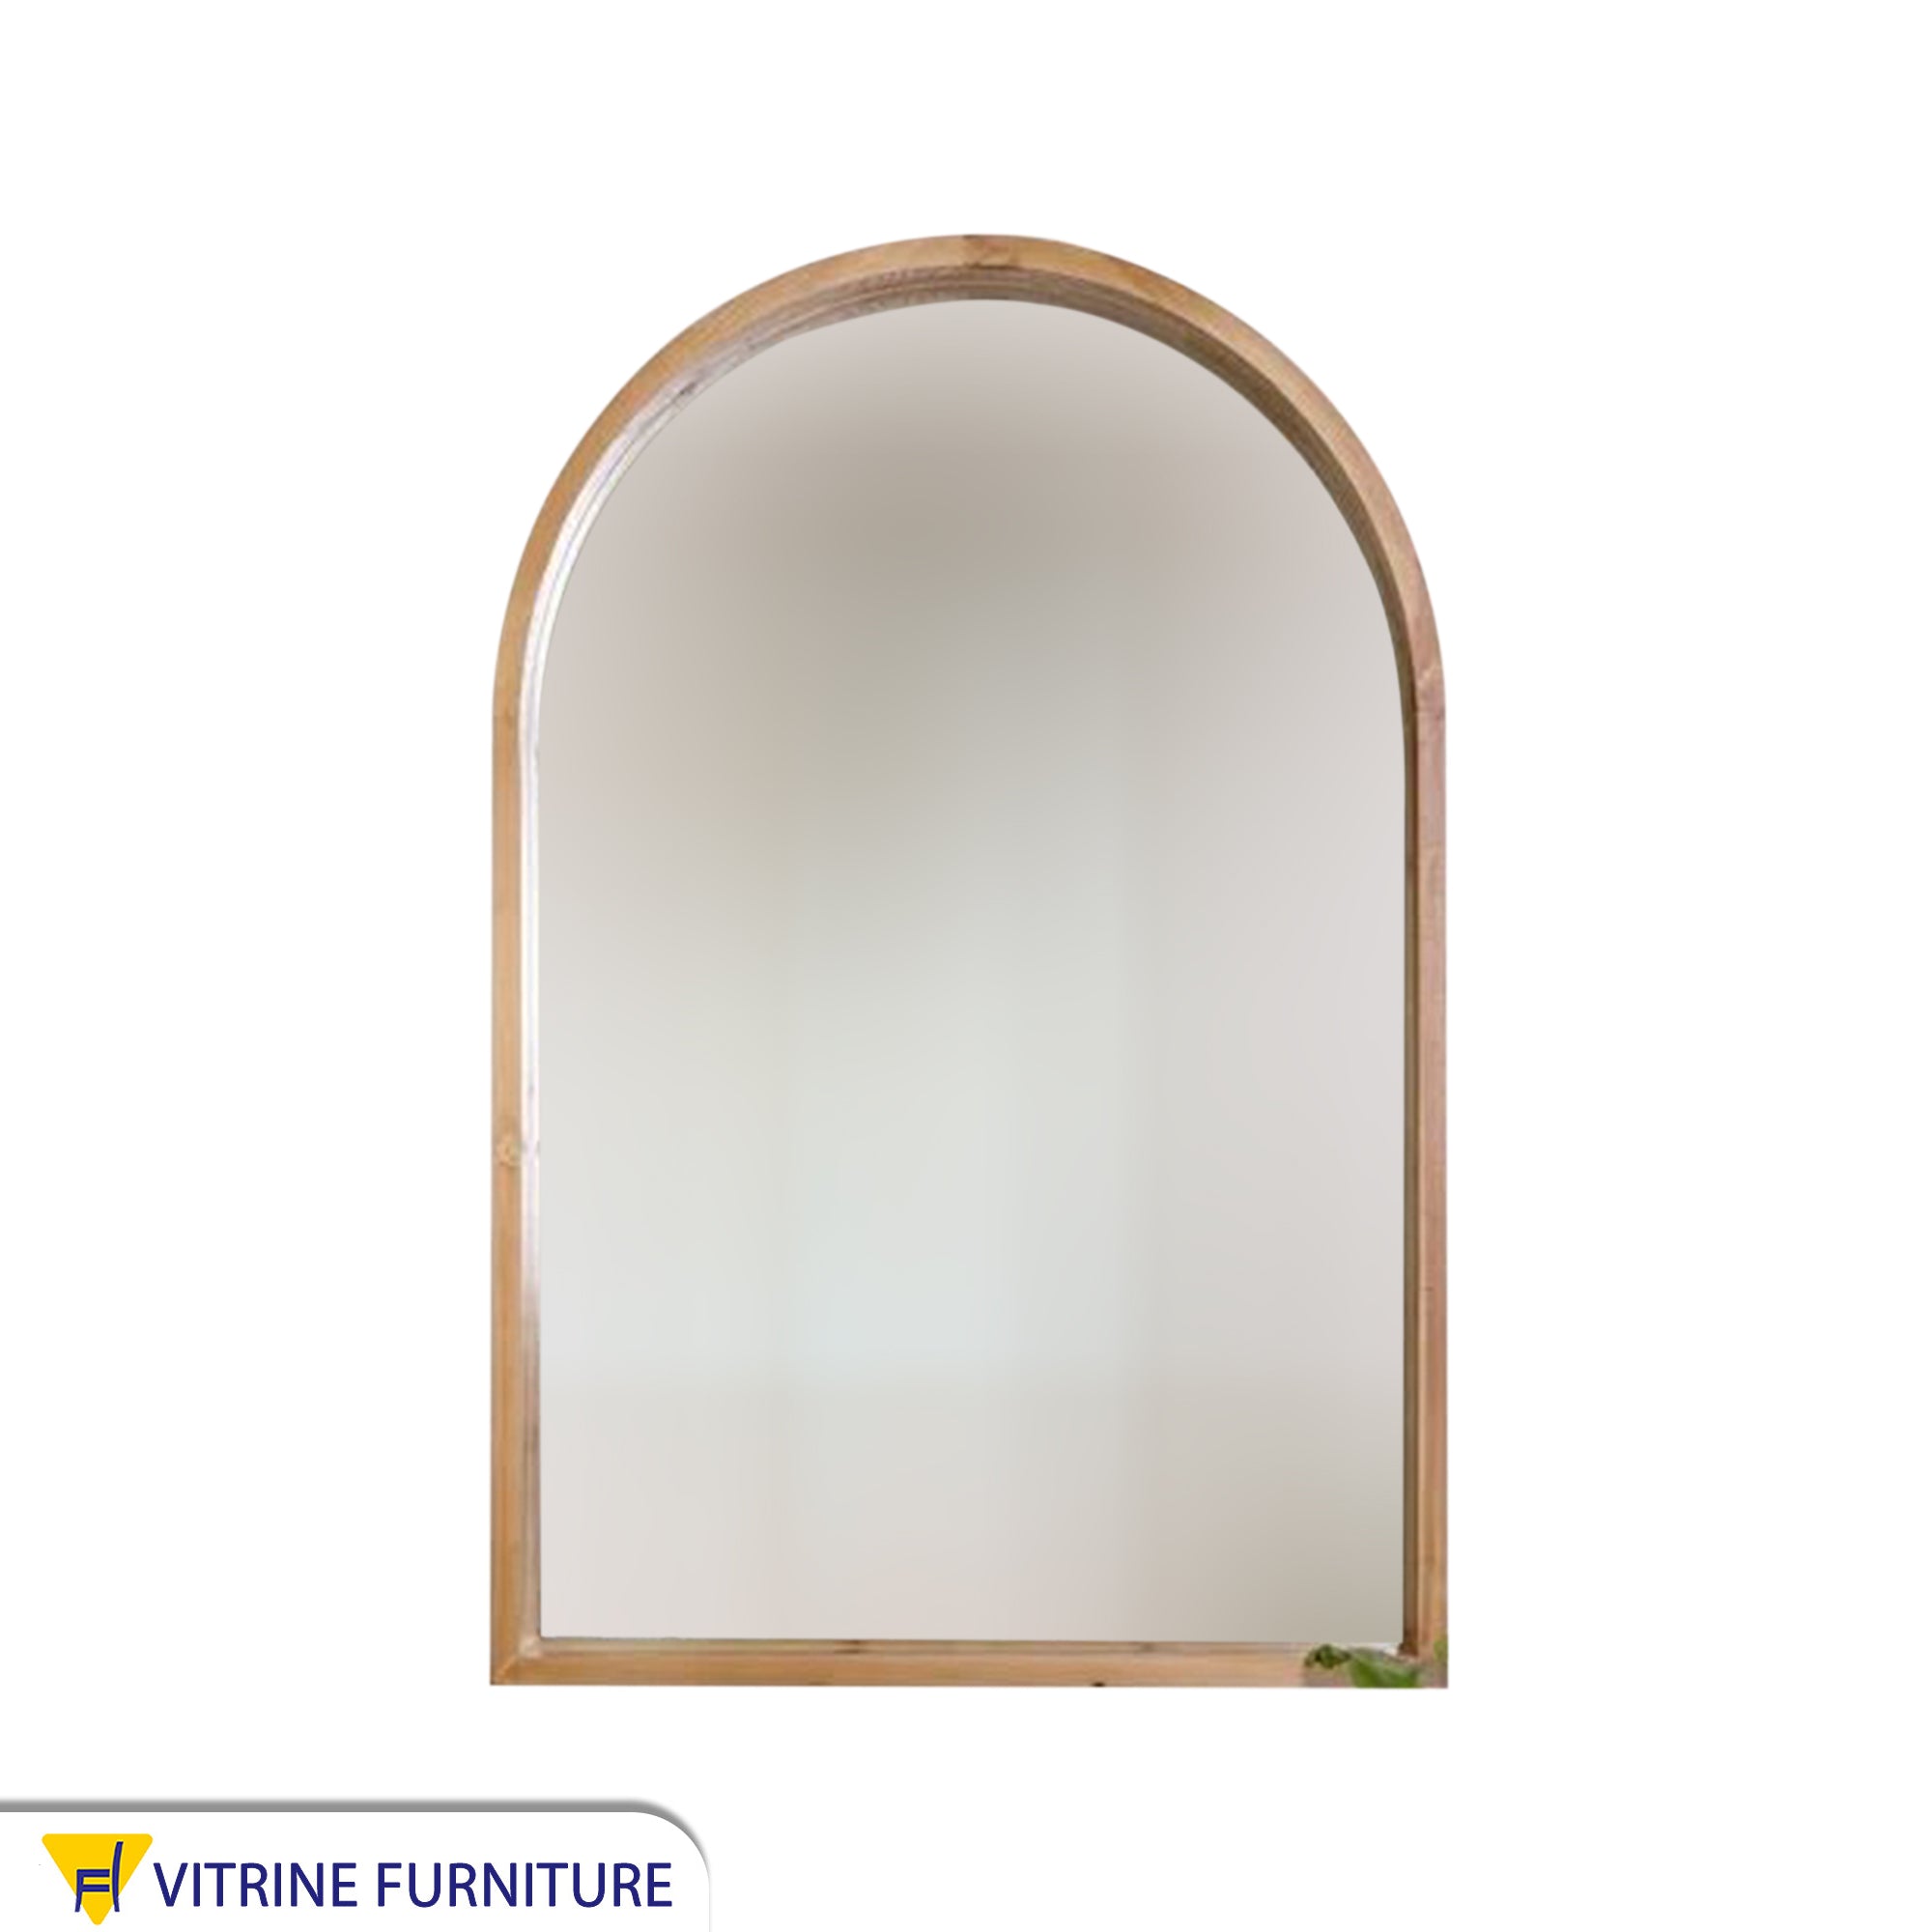 Arch mirror 50*70 with a golden wood frame